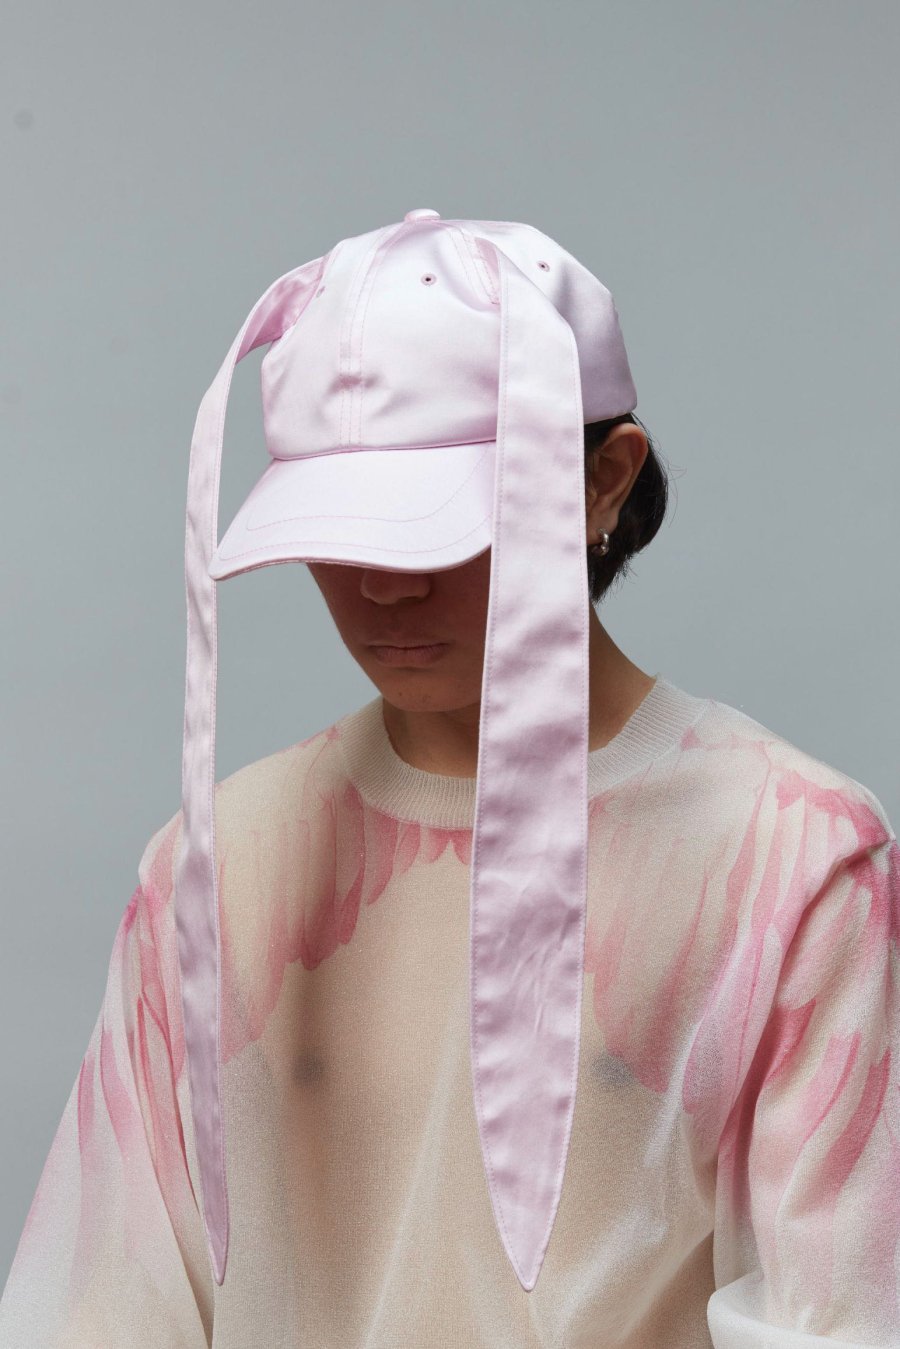 MASU  LONG EAR CAP(BABY PINK)<img class='new_mark_img2' src='https://img.shop-pro.jp/img/new/icons15.gif' style='border:none;display:inline;margin:0px;padding:0px;width:auto;' />